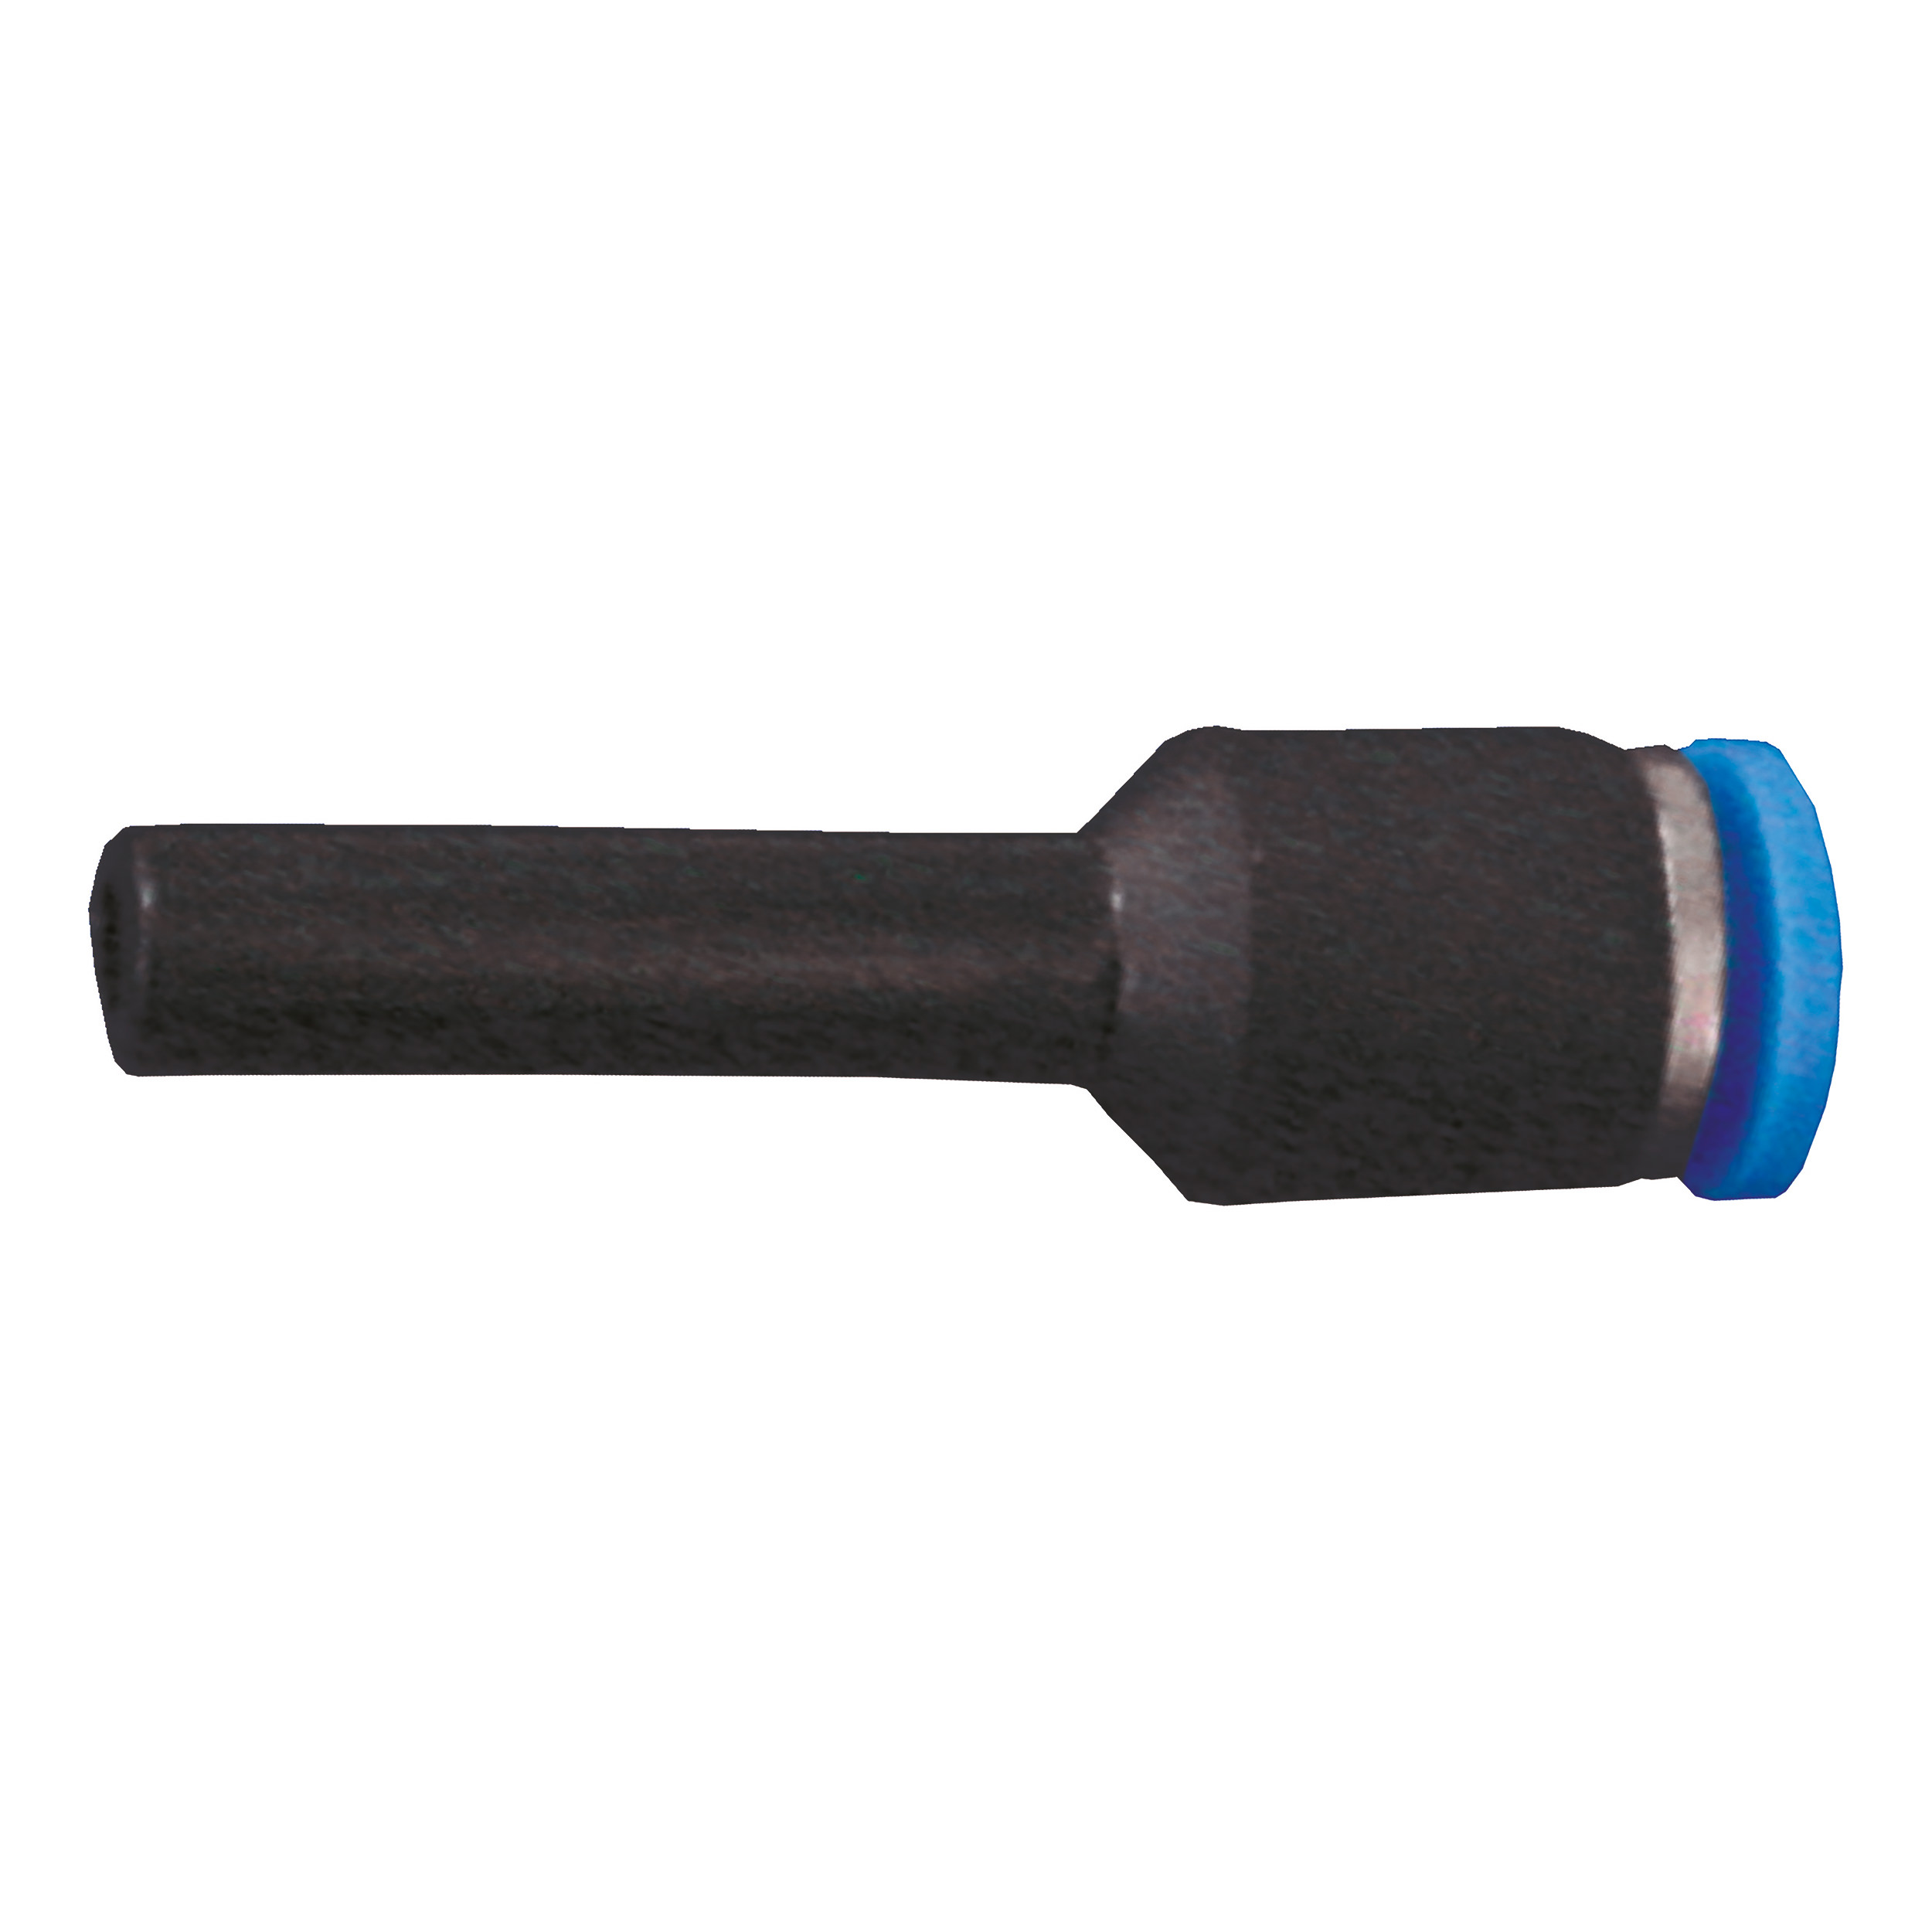 Push-in connector with sleeve, hose-Ø: D1: 6 mm, D2: 4 mm; B(length): 42 mm, max. operating pressure: 145 psi, reduced